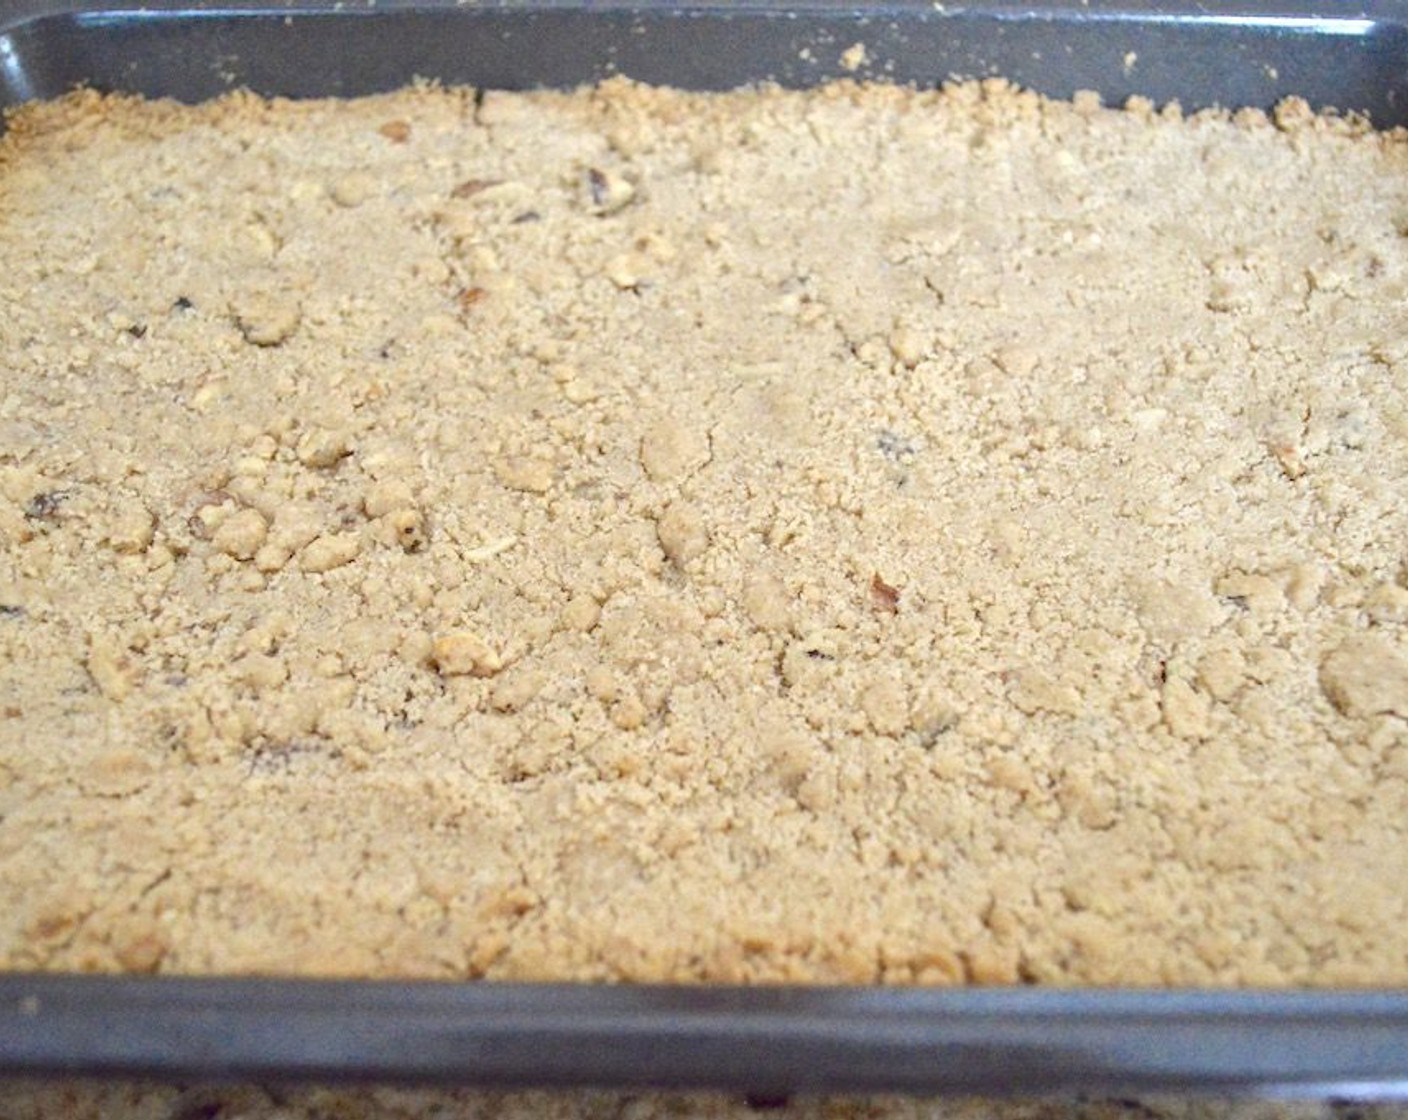 step 10 Reduce the oven heat to 350 degrees F (180 degrees C). Take the crust and spread the filling out evenly on it. Then take the remaining dough and crumble it evenly all over the top. It may not necessarily cover it completely. Bake the bars for about 25 to 30 minutes, until bubbly and completely golden brown on top.